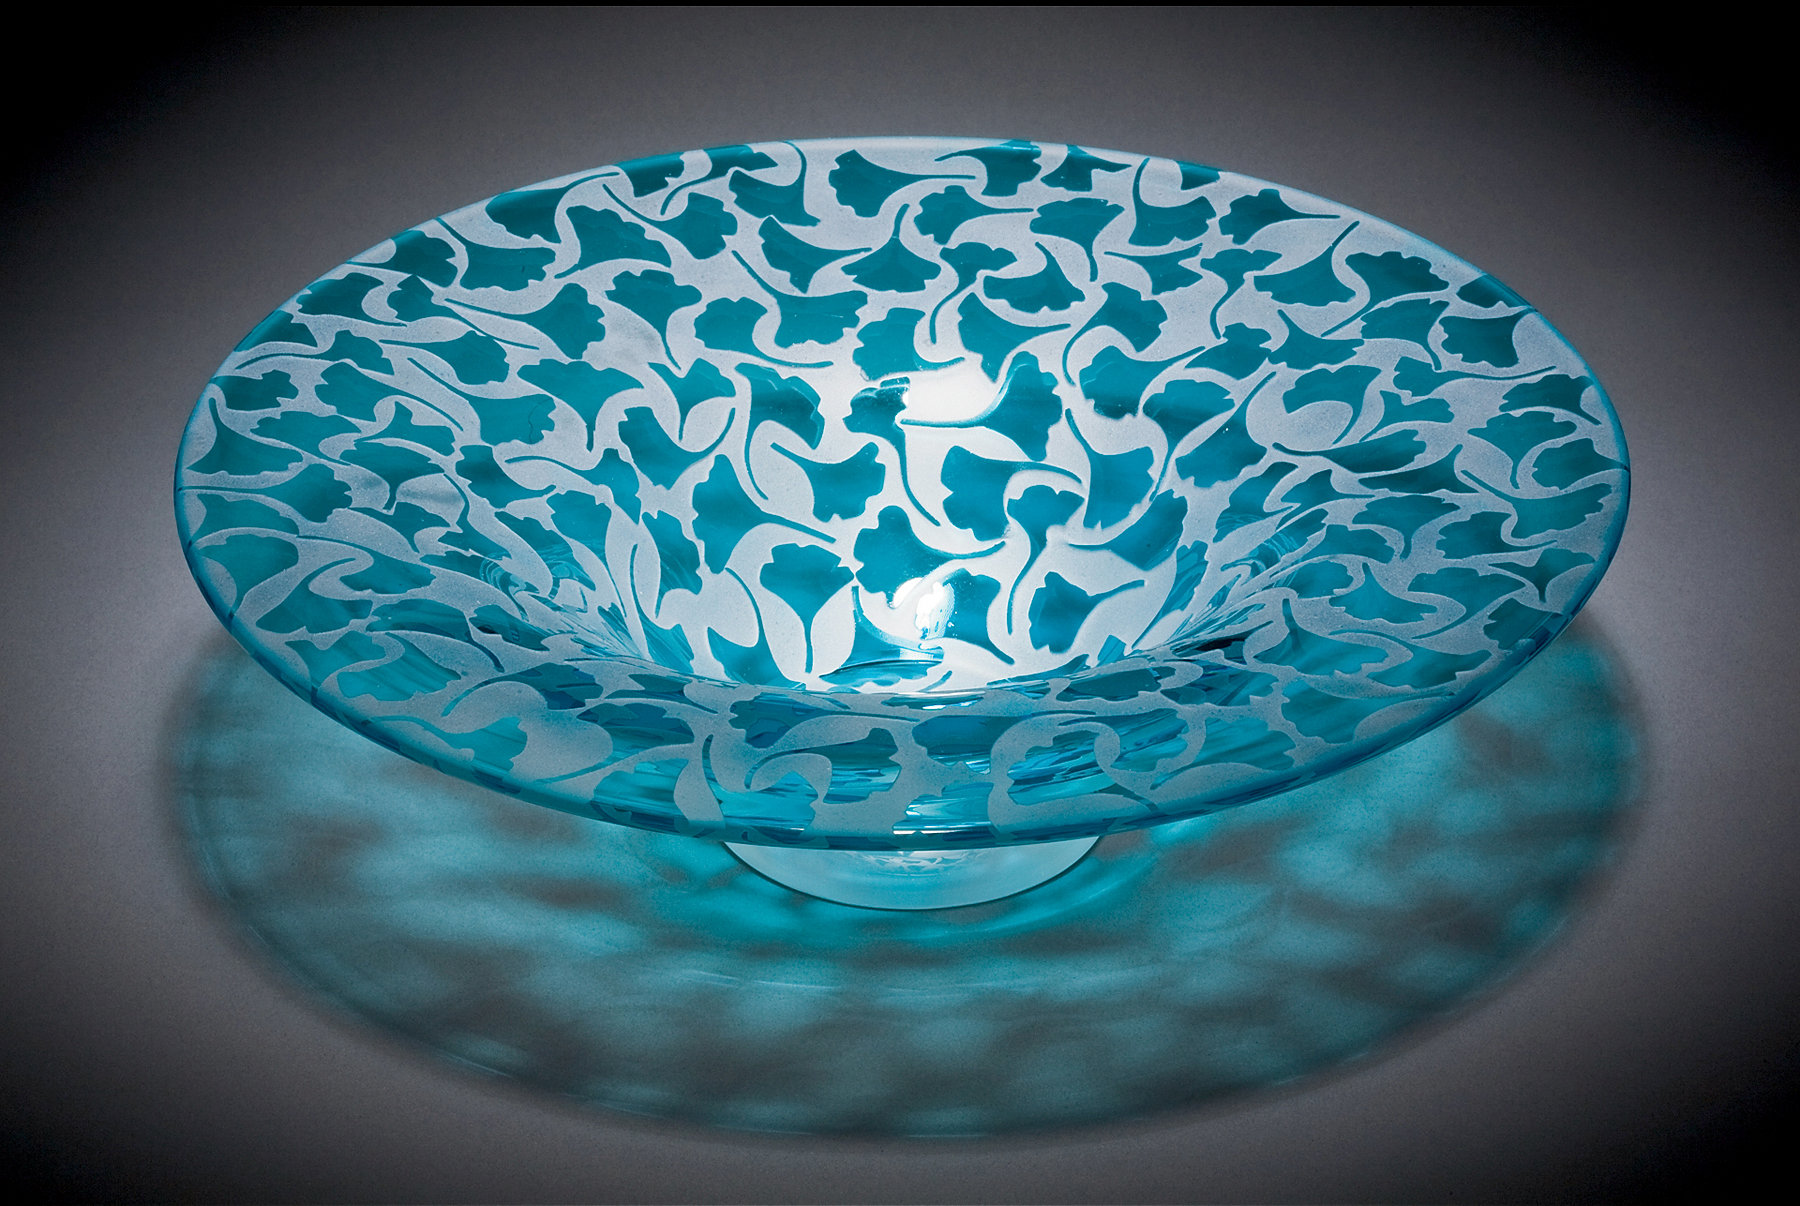 Elasticity booklet pine tree Ginkgo Bowl by Lisa Tate (Art Glass Bowl) | Artful Home